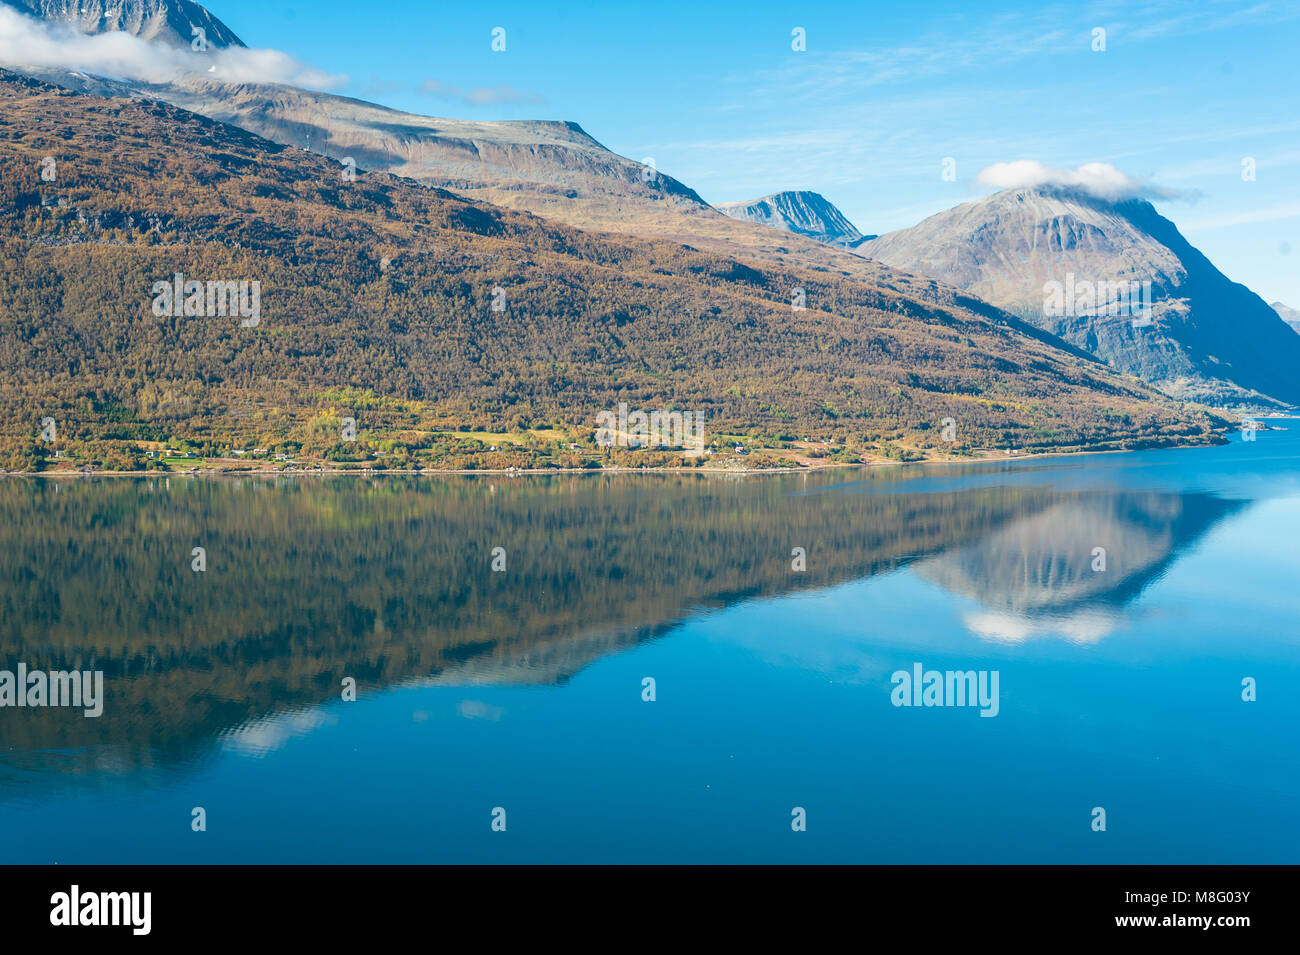 Calm placid freshwater lake surrounded by barren mountains Stock Photo